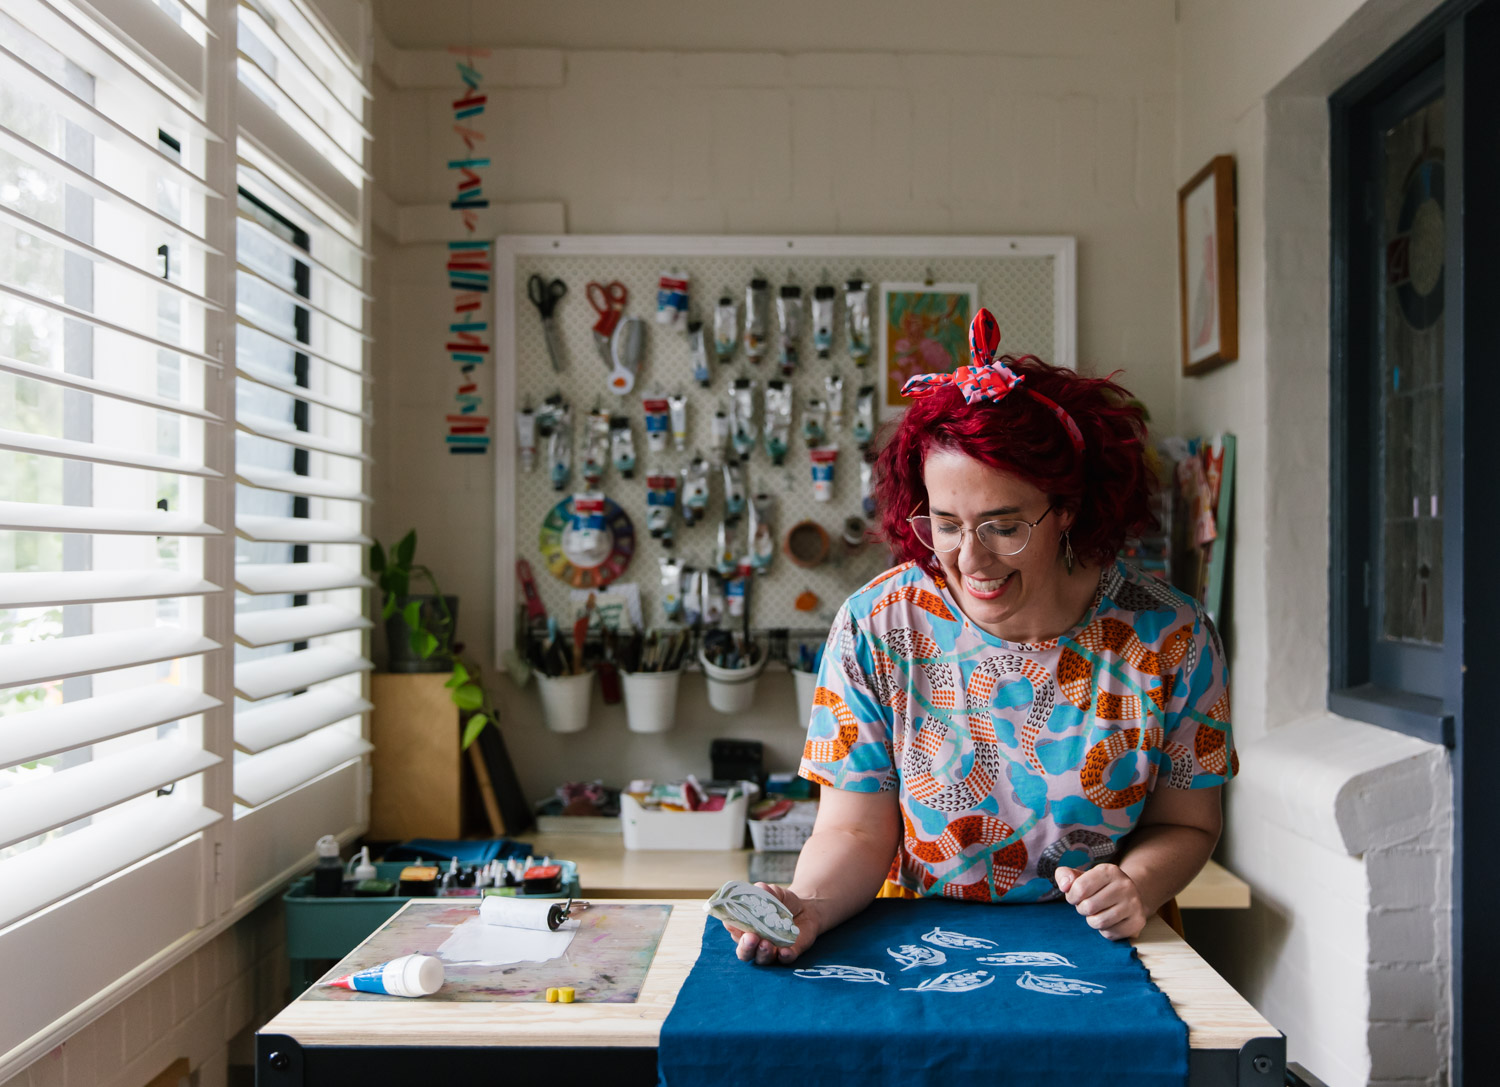 Portrait of a woman laughing while she block prints by hand onto navy fabric in her creative studio space